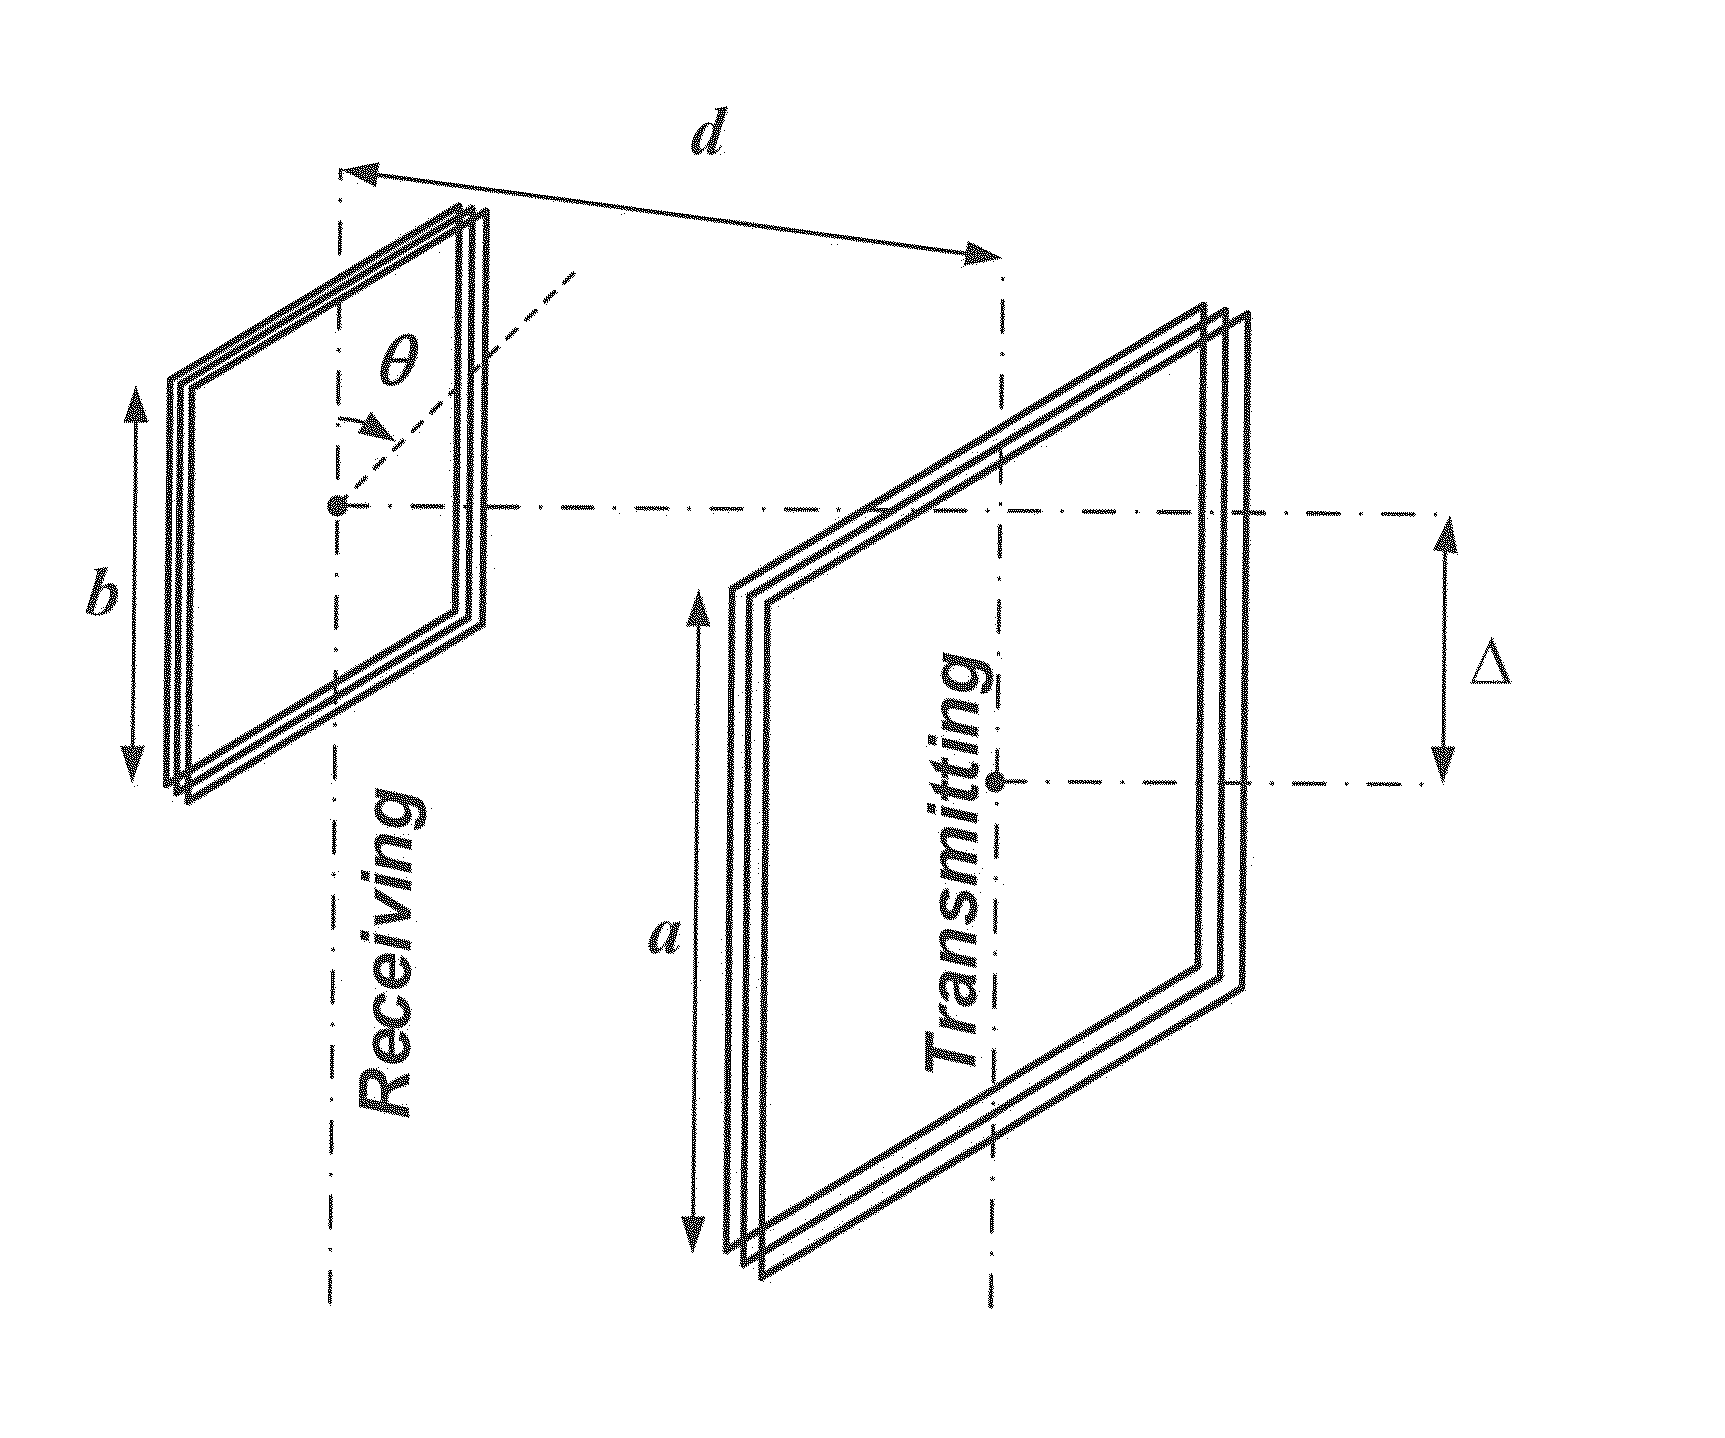 Apparatus for transferring electromagnetic energy